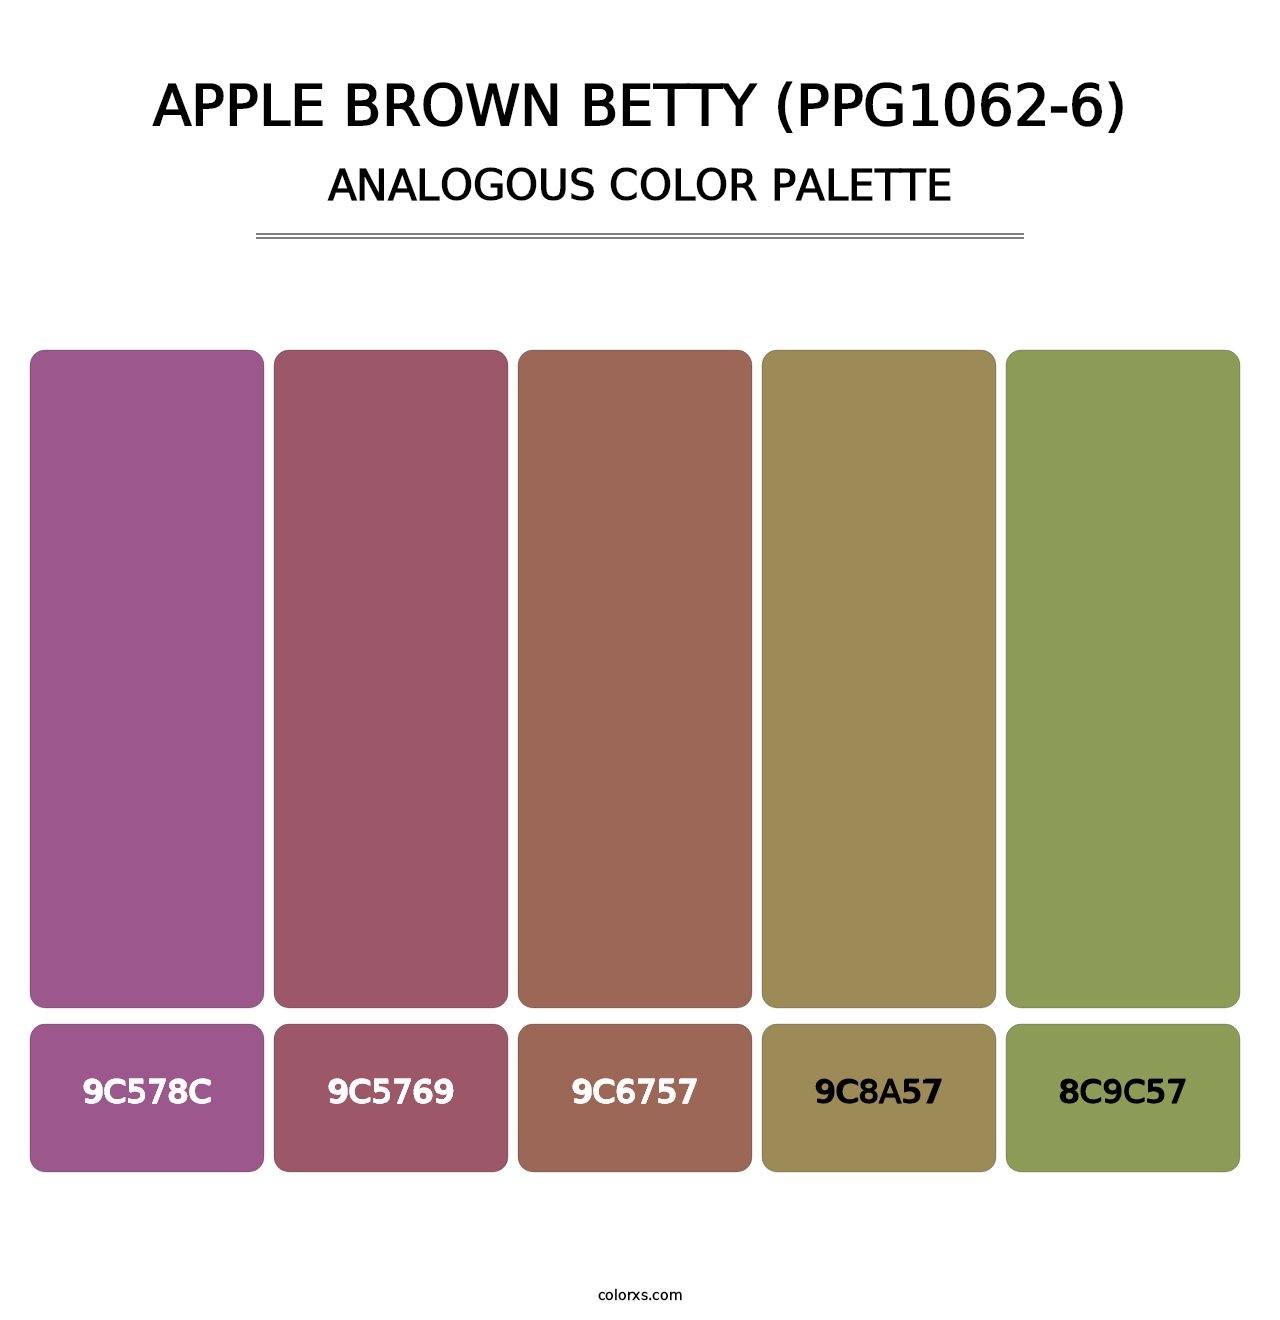 Apple Brown Betty (PPG1062-6) - Analogous Color Palette